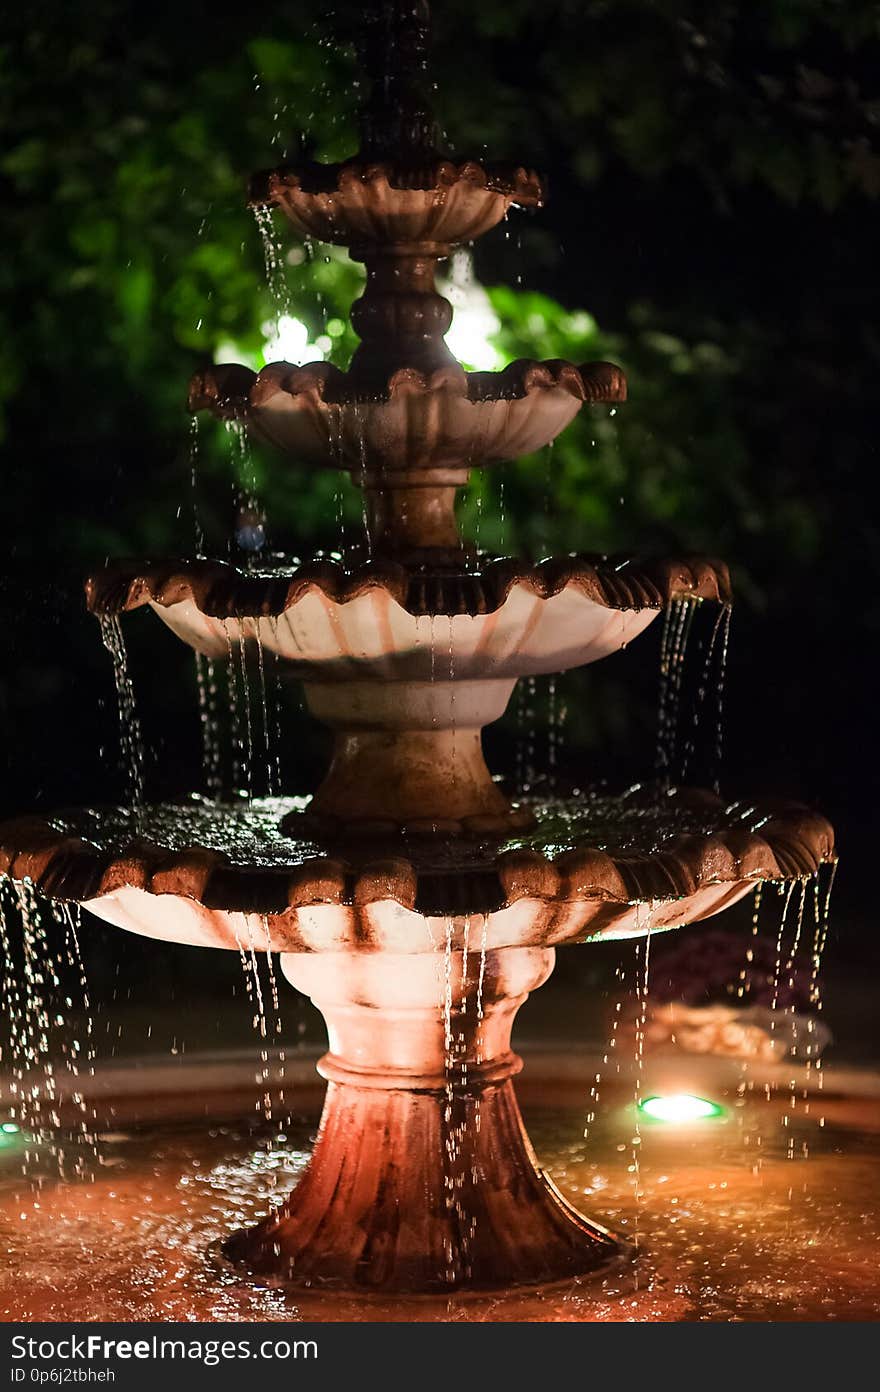 The fountain in a garden in the evening by the light of lamps. Romantic atmosphere. Water flows and splashes in the fountain. The fountain in a garden in the evening by the light of lamps. Romantic atmosphere. Water flows and splashes in the fountain